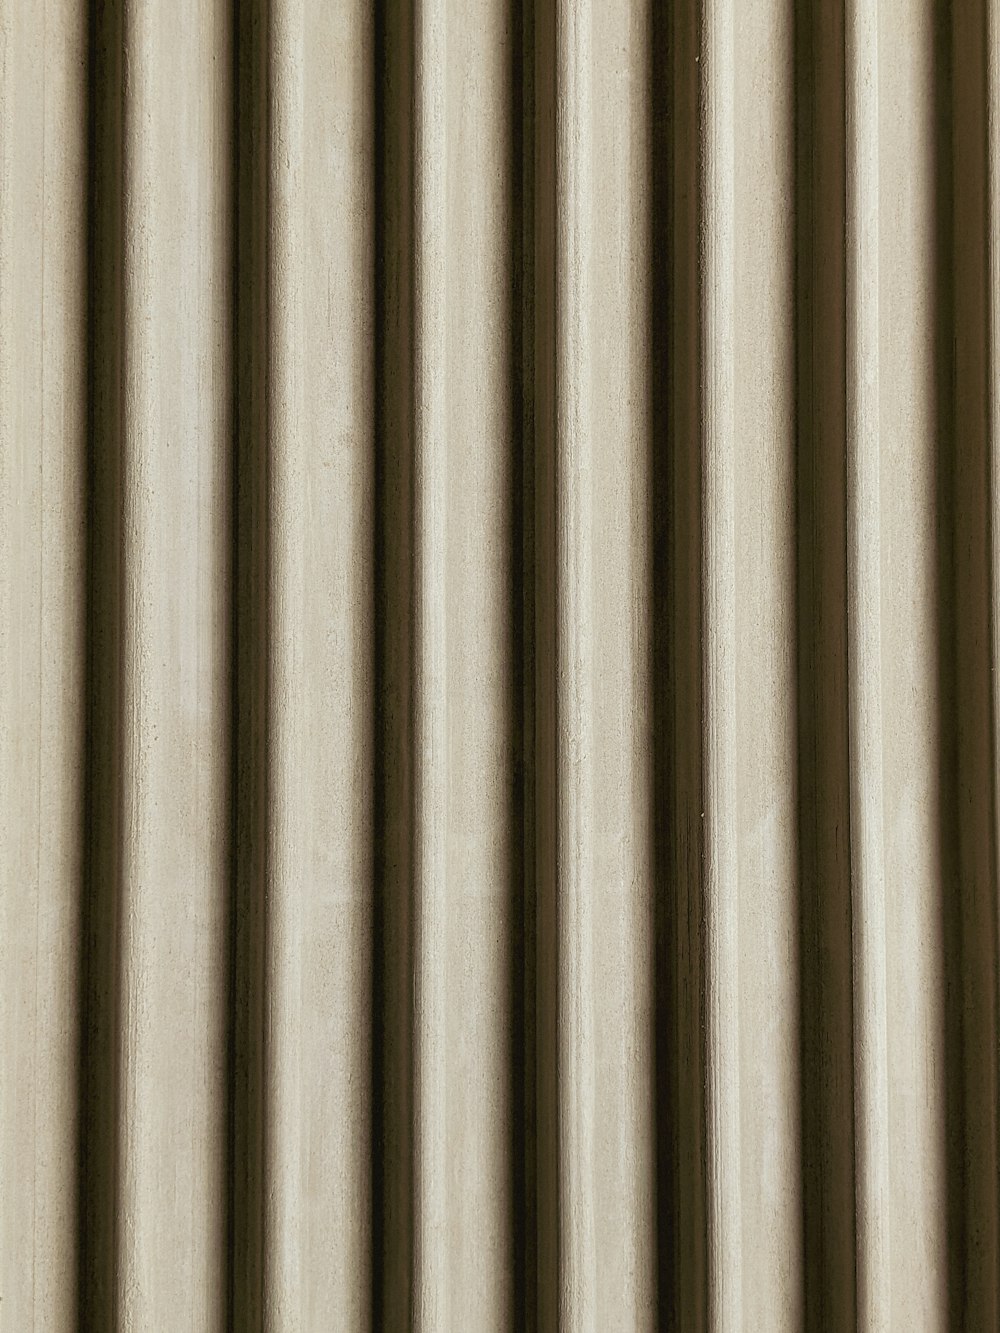 a close up of a curtain with vertical stripes